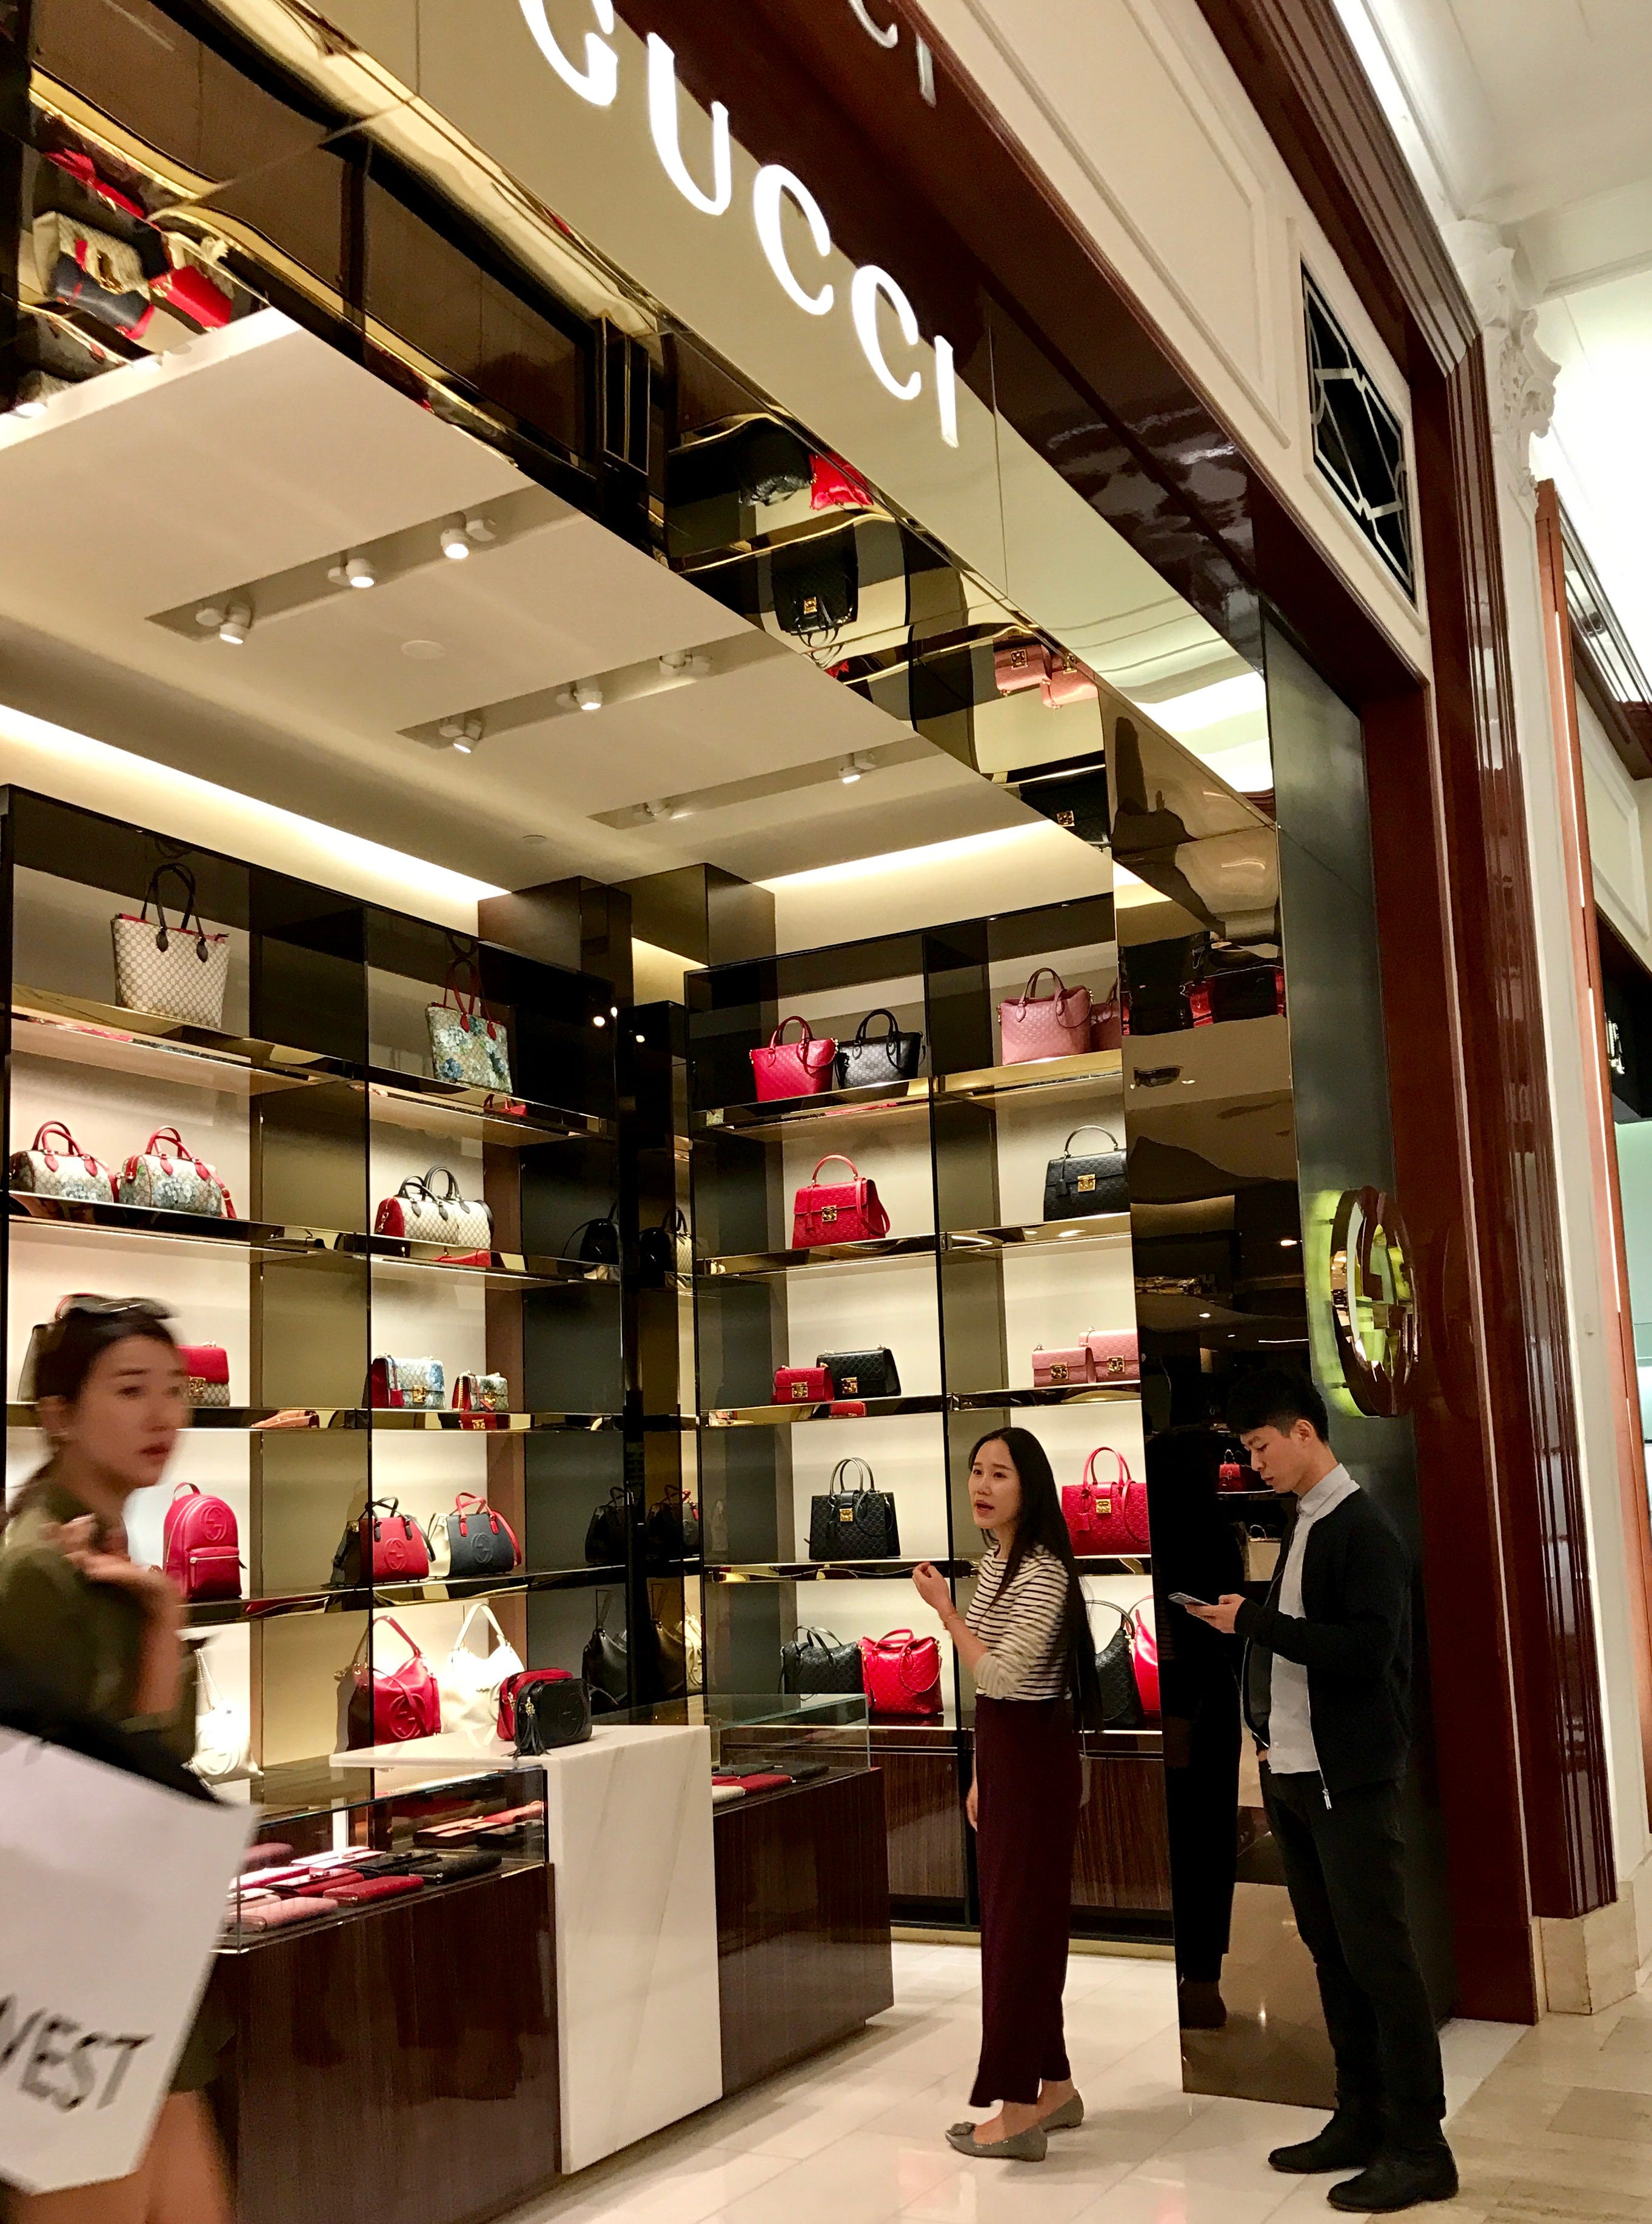 gucci store in saks fifth avenue